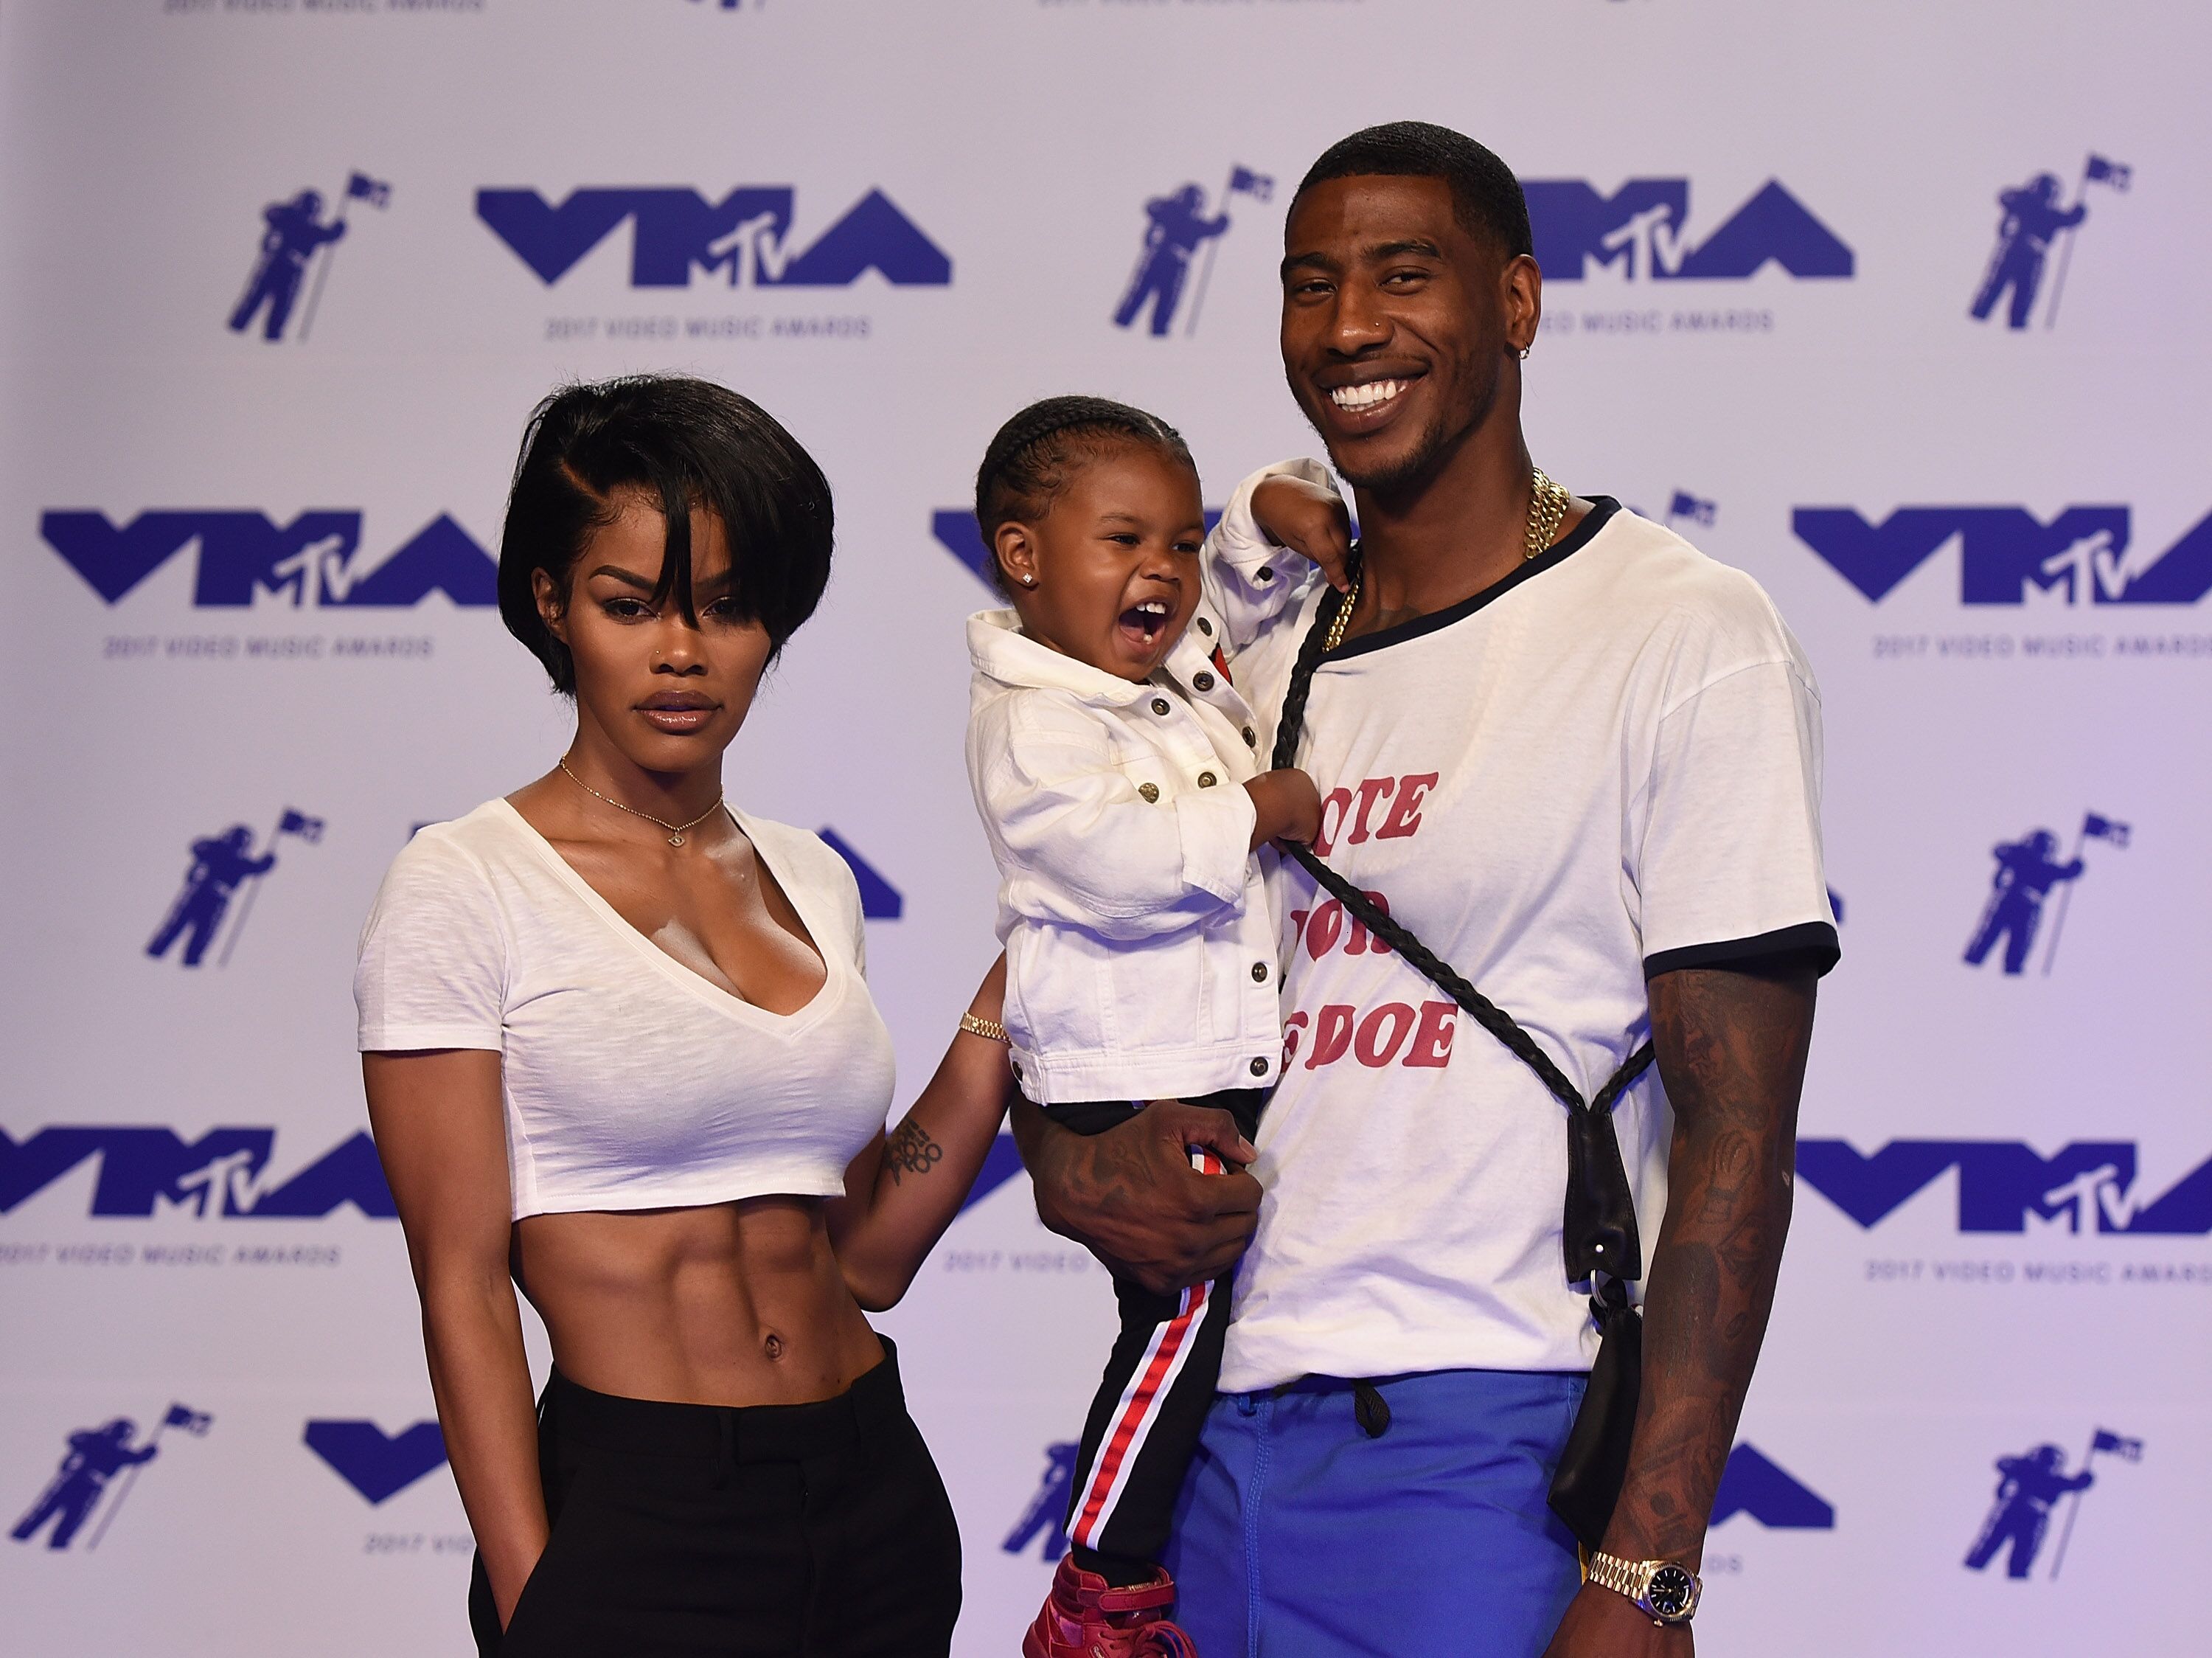 Teyana Taylor, Iman Shumpert, and their daughter, Junie at the MTV Video Music Awards in August 2017. | Photo: Getty Images